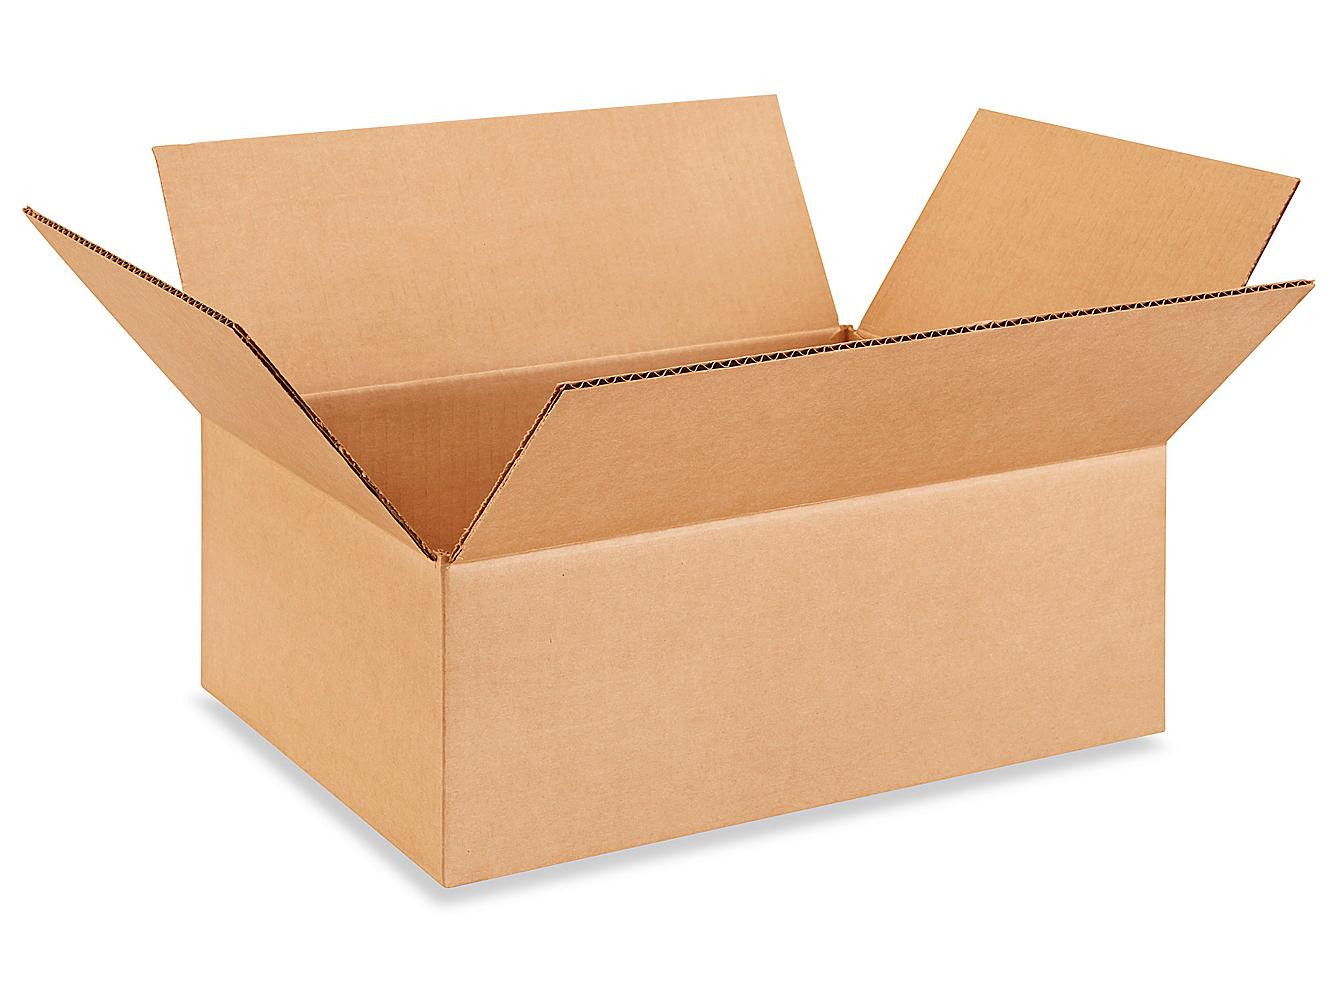 25-16 x 6 x 6 Corrugated Shipping Boxes Packing Storage Cartons Cardboard Box 